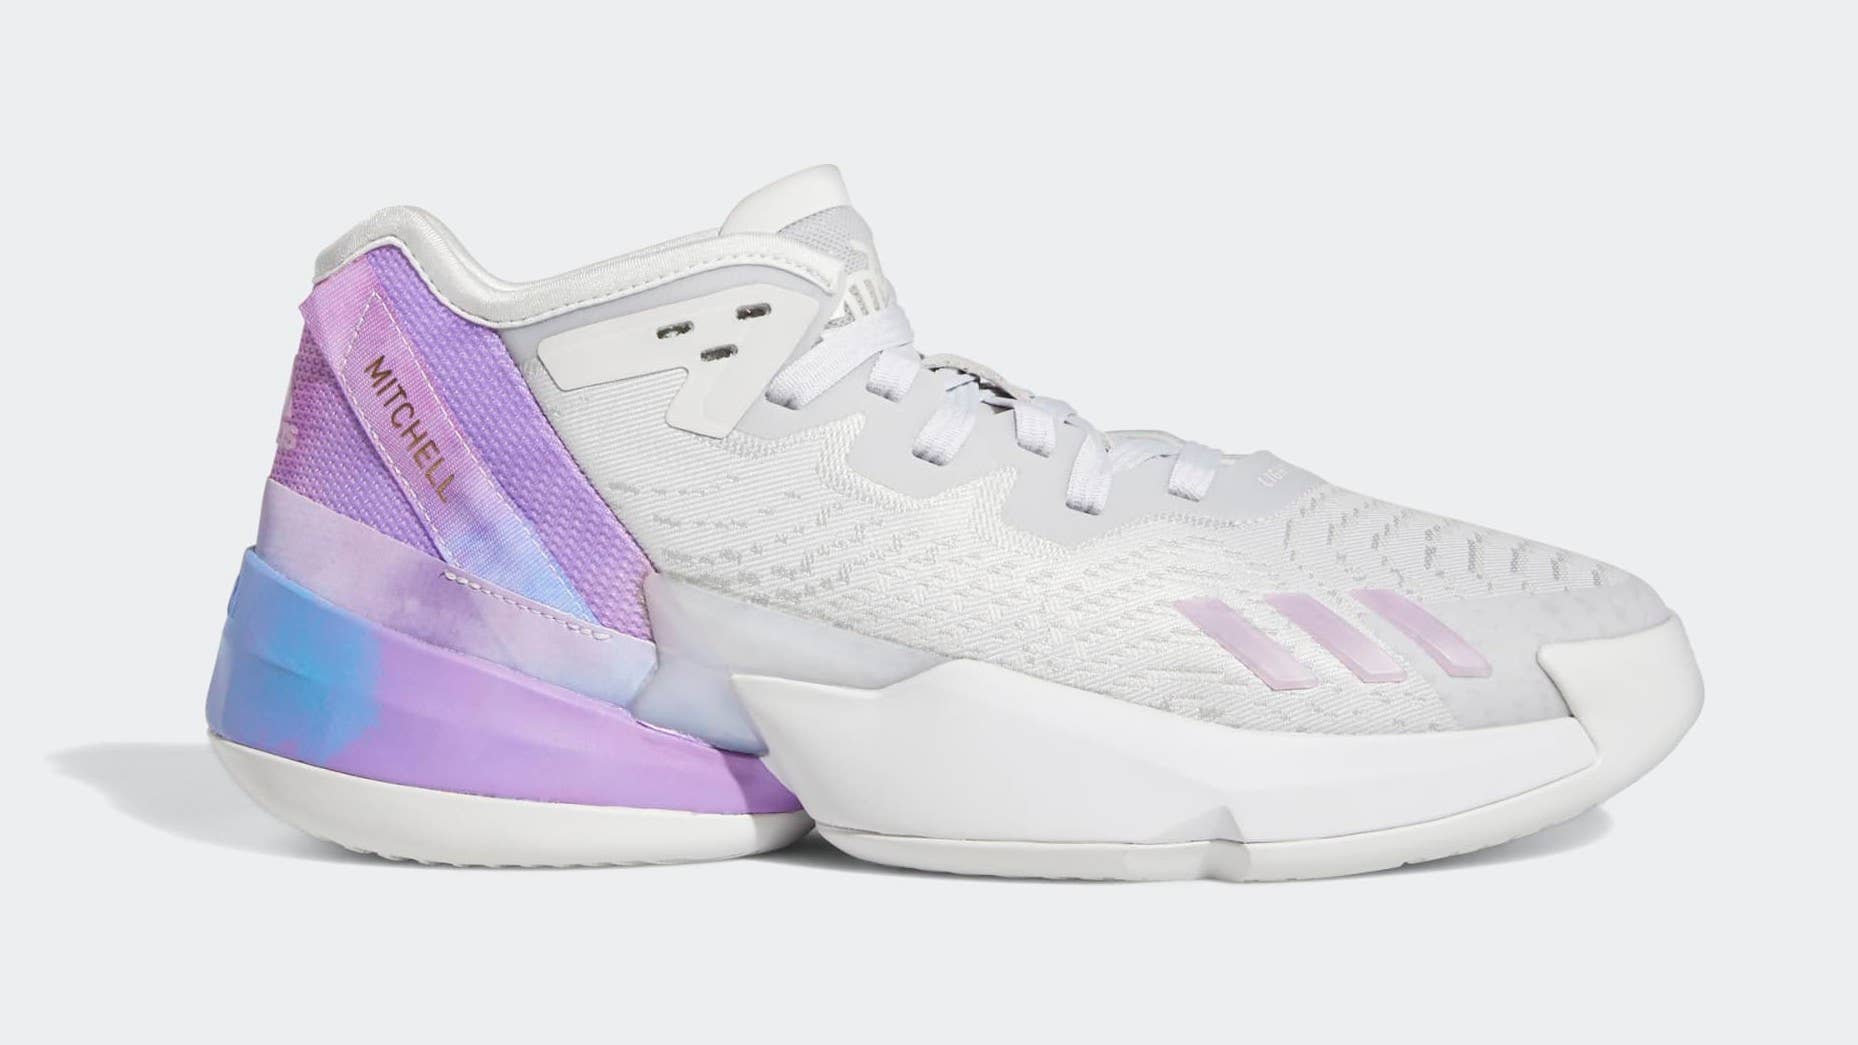 Donovan Mitchell's Adidas Sneakers Are on Sale for $71